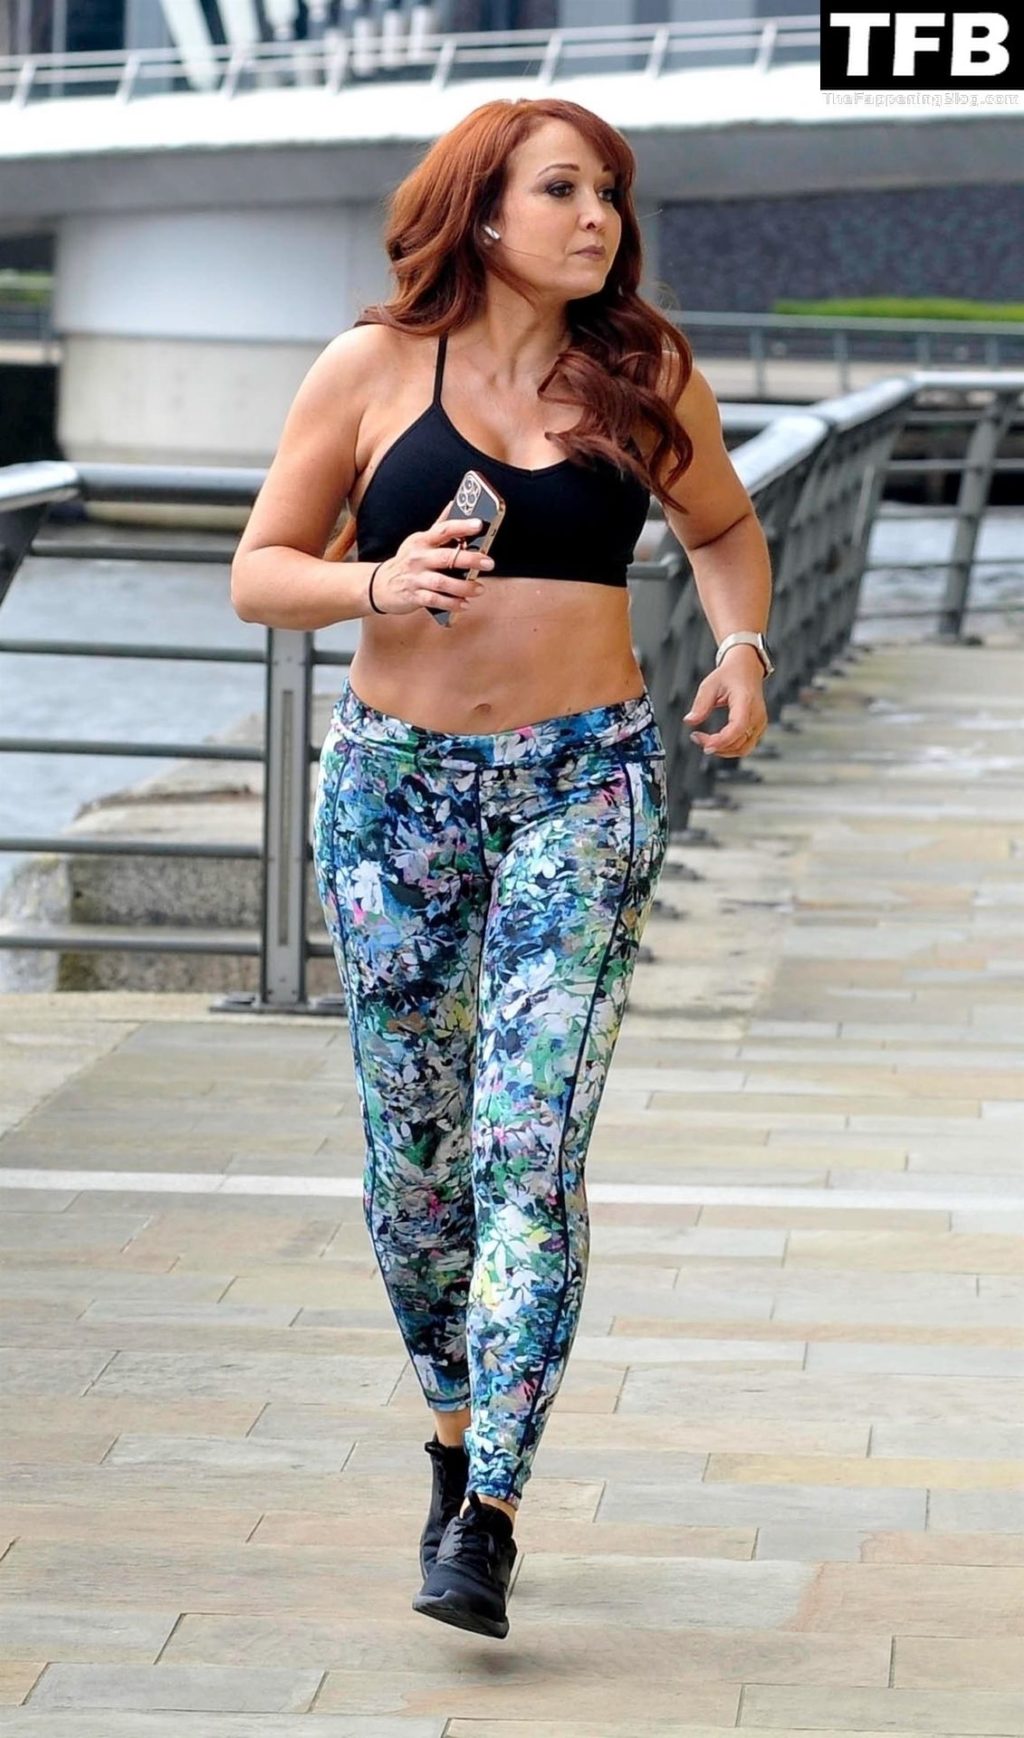 Amy Anzel Sexy The Fappening Blog 5 1024x1738 - Amy Anzel Puts on a Busty Display Working Out at Media City in Manchester (13 Photos)